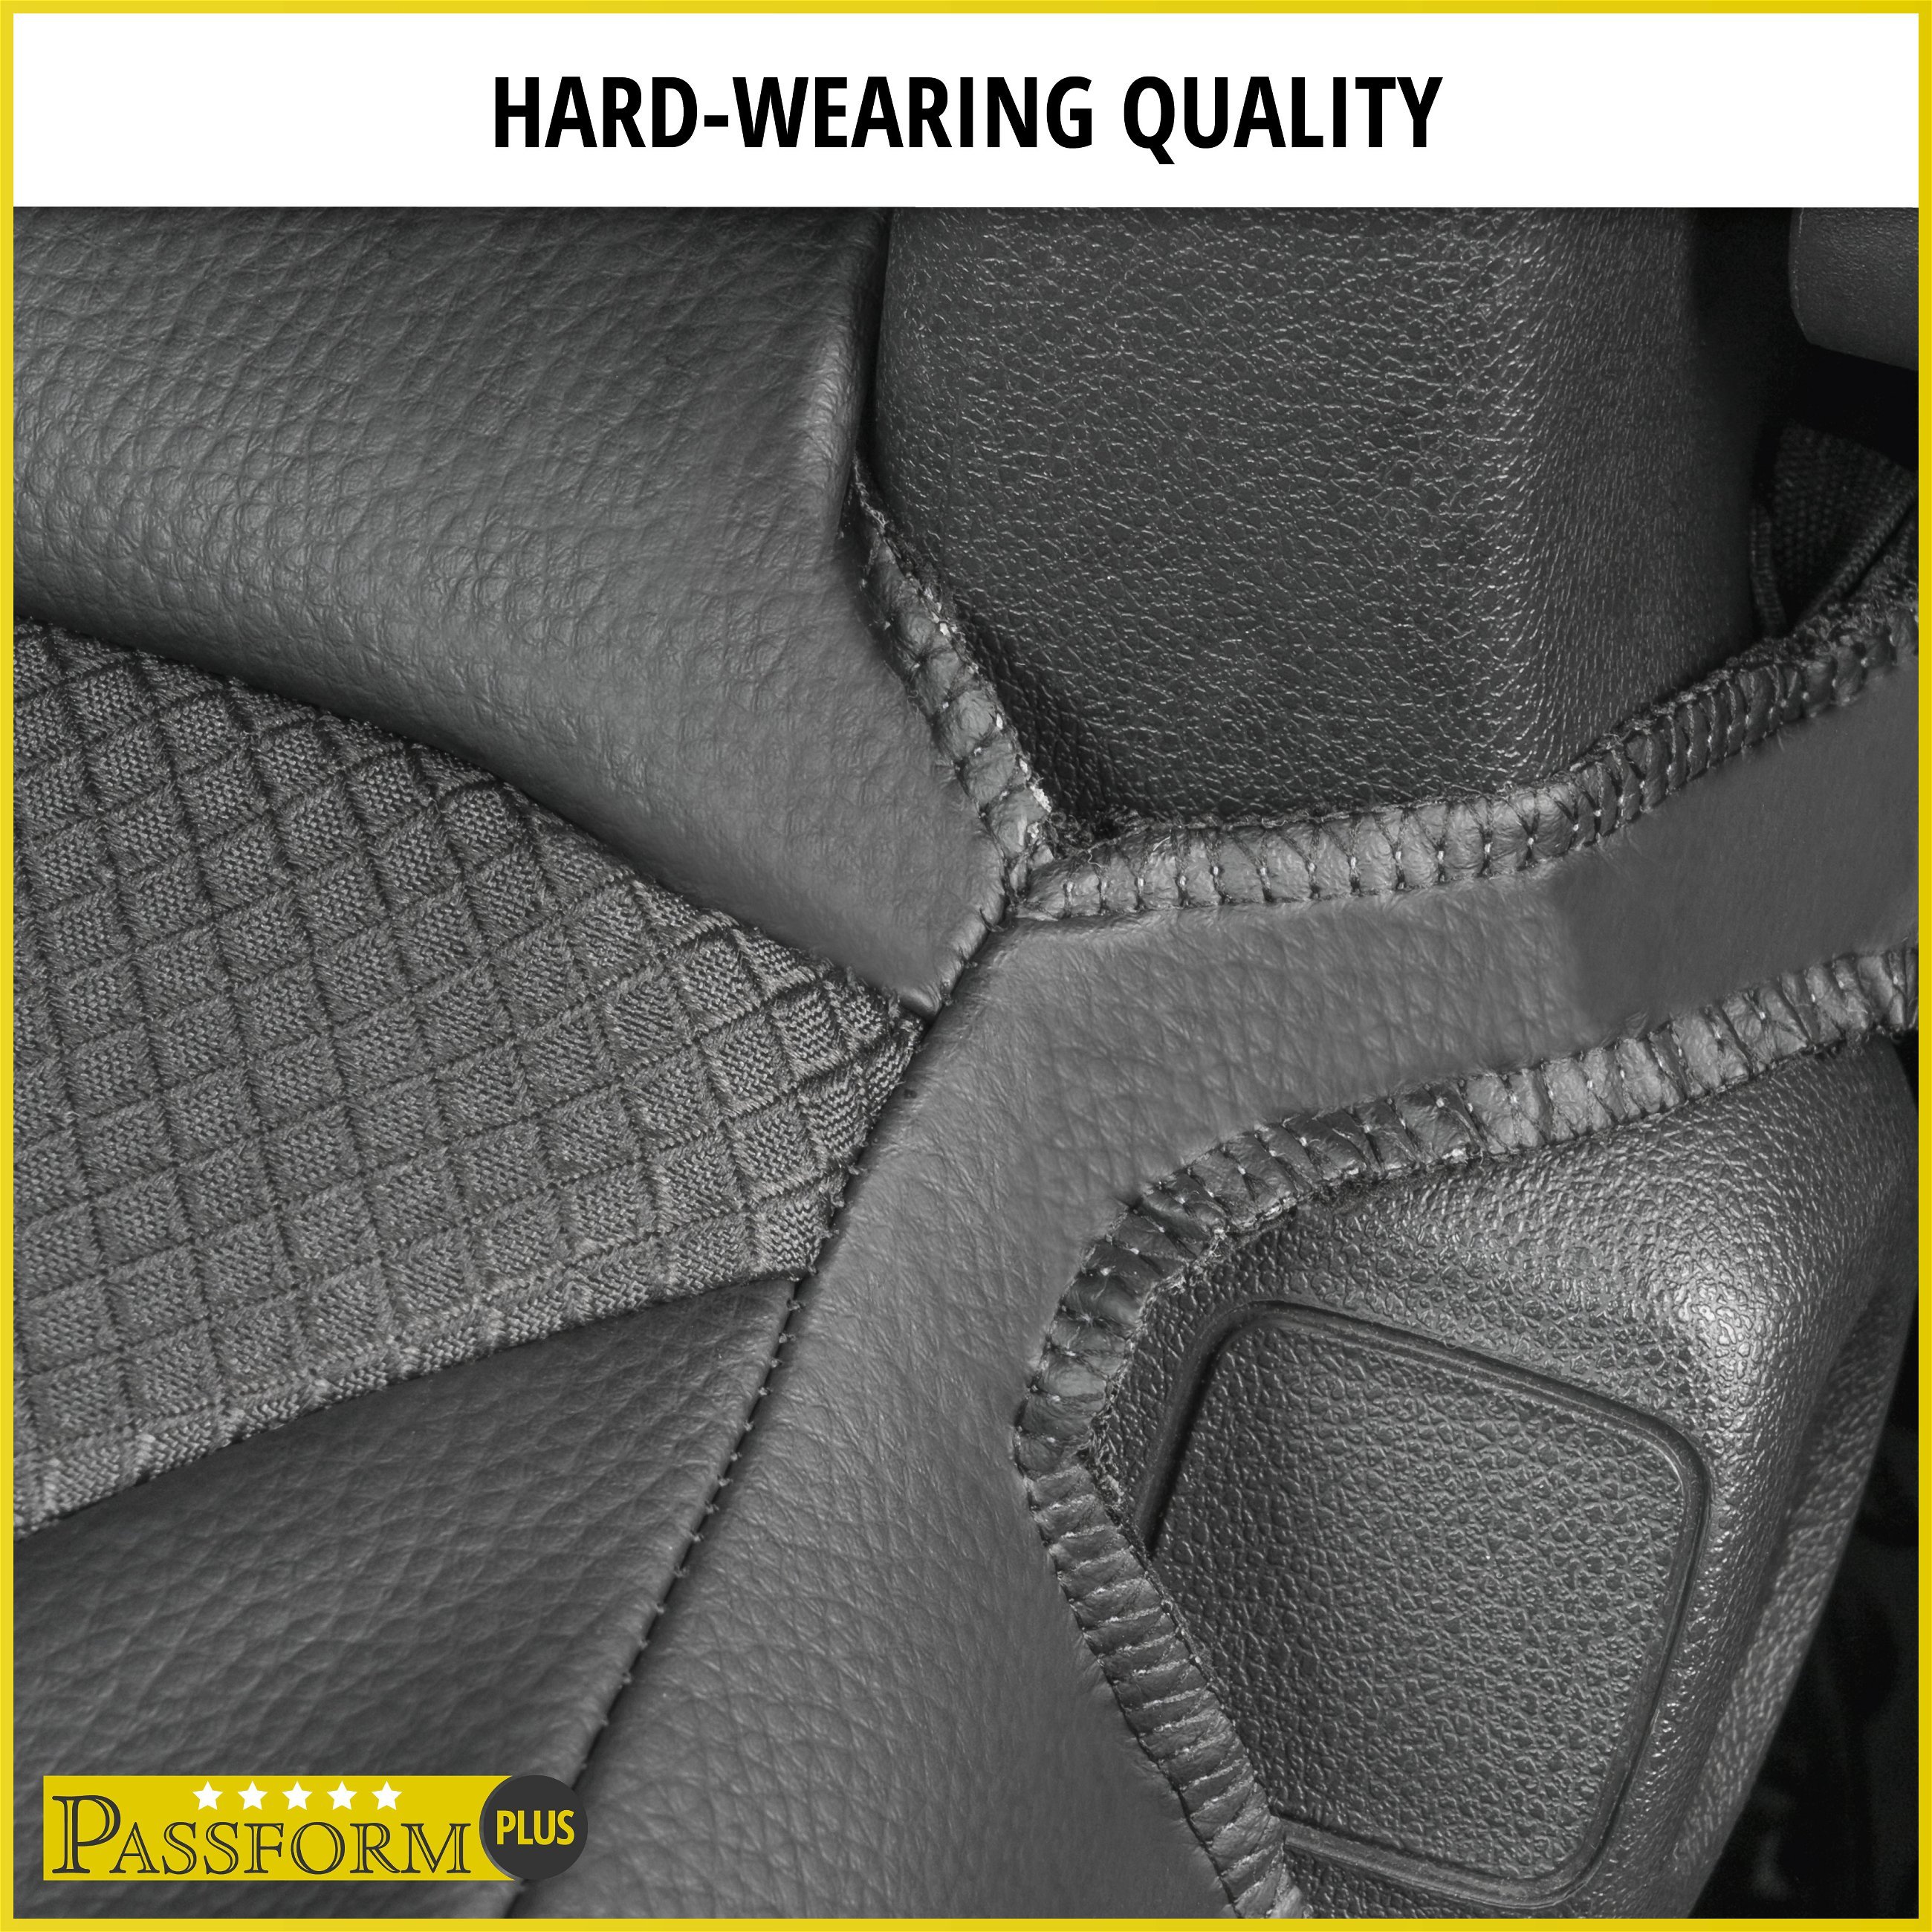 Premium Seat Cover for VW Crafter 04/2006-12/2016, 2 single seat covers front + 2 armrest covers